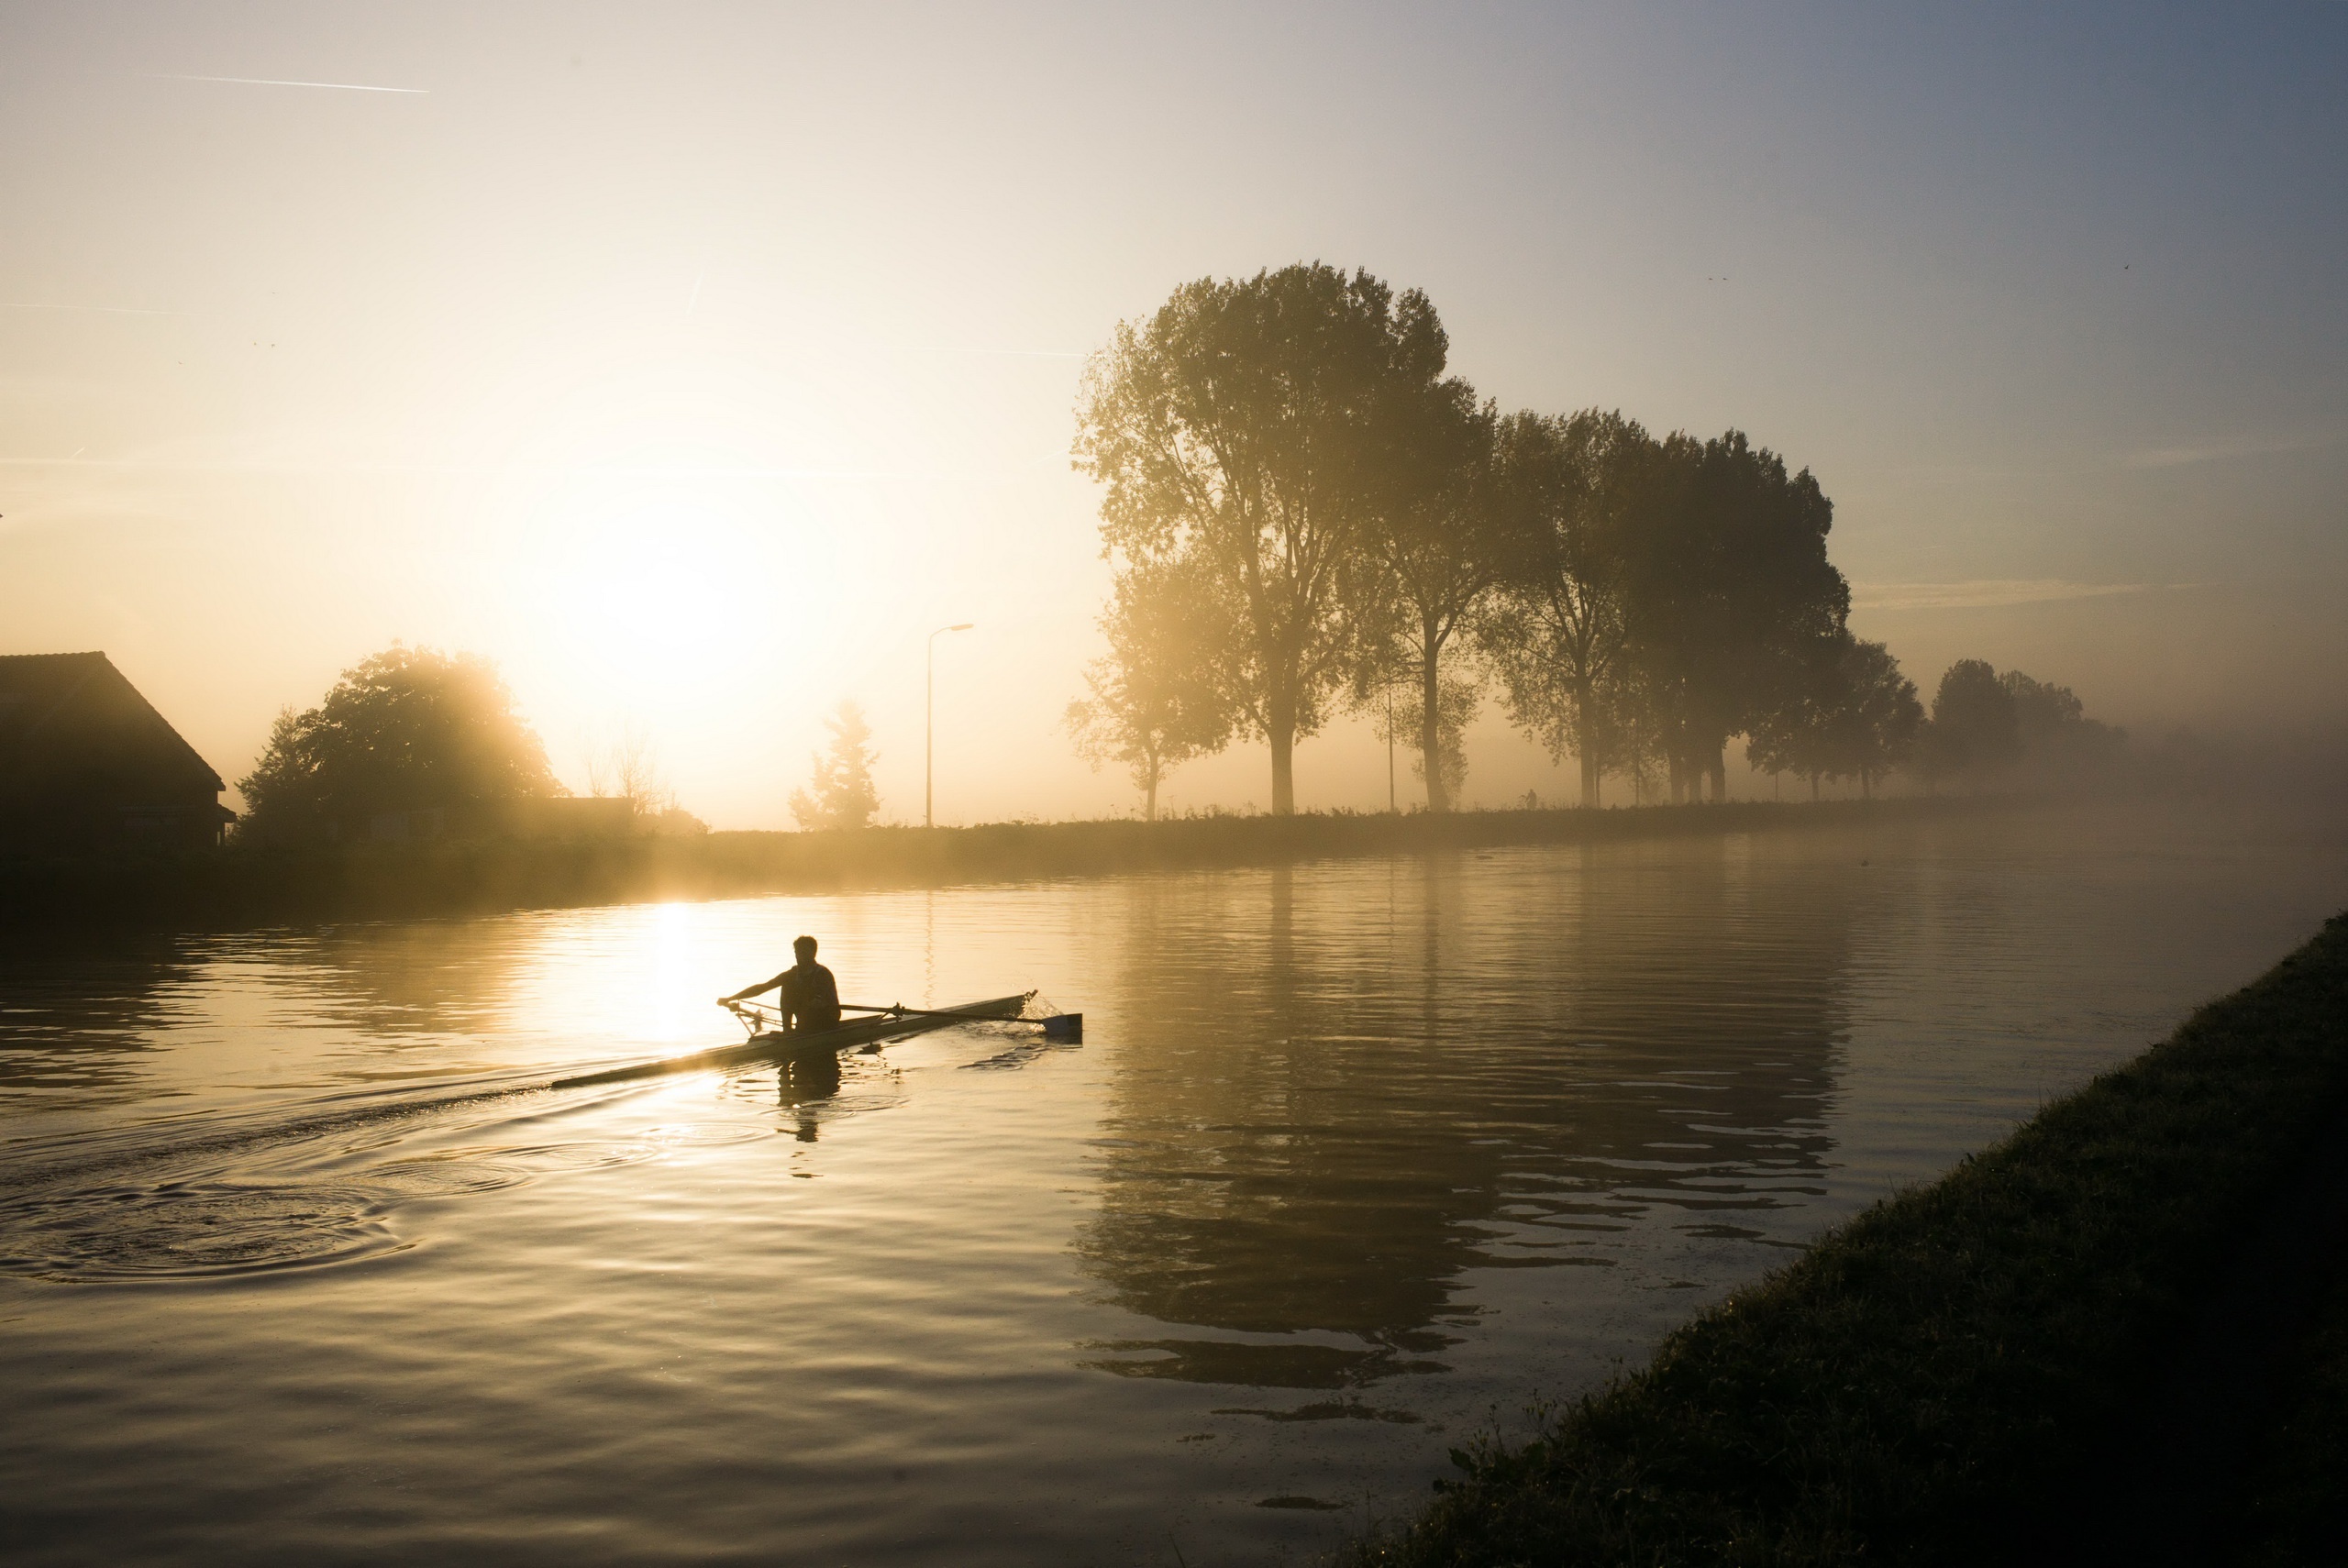 Rowing: A professional sculler during a training session on a river during the sunrise. 2560x1710 HD Wallpaper.